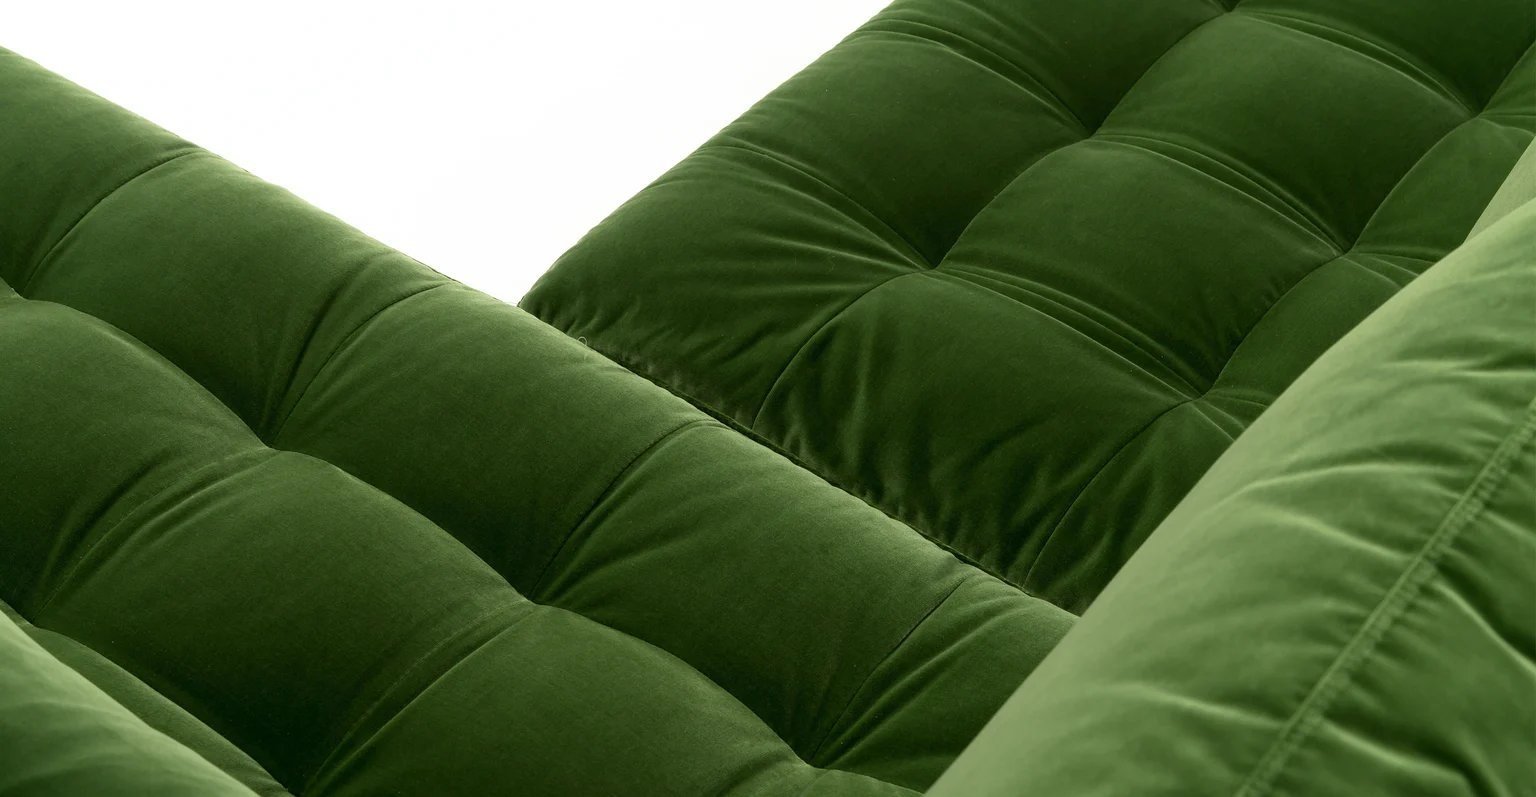 Sven Right Sectional Sofa, Grass Green - Image 7